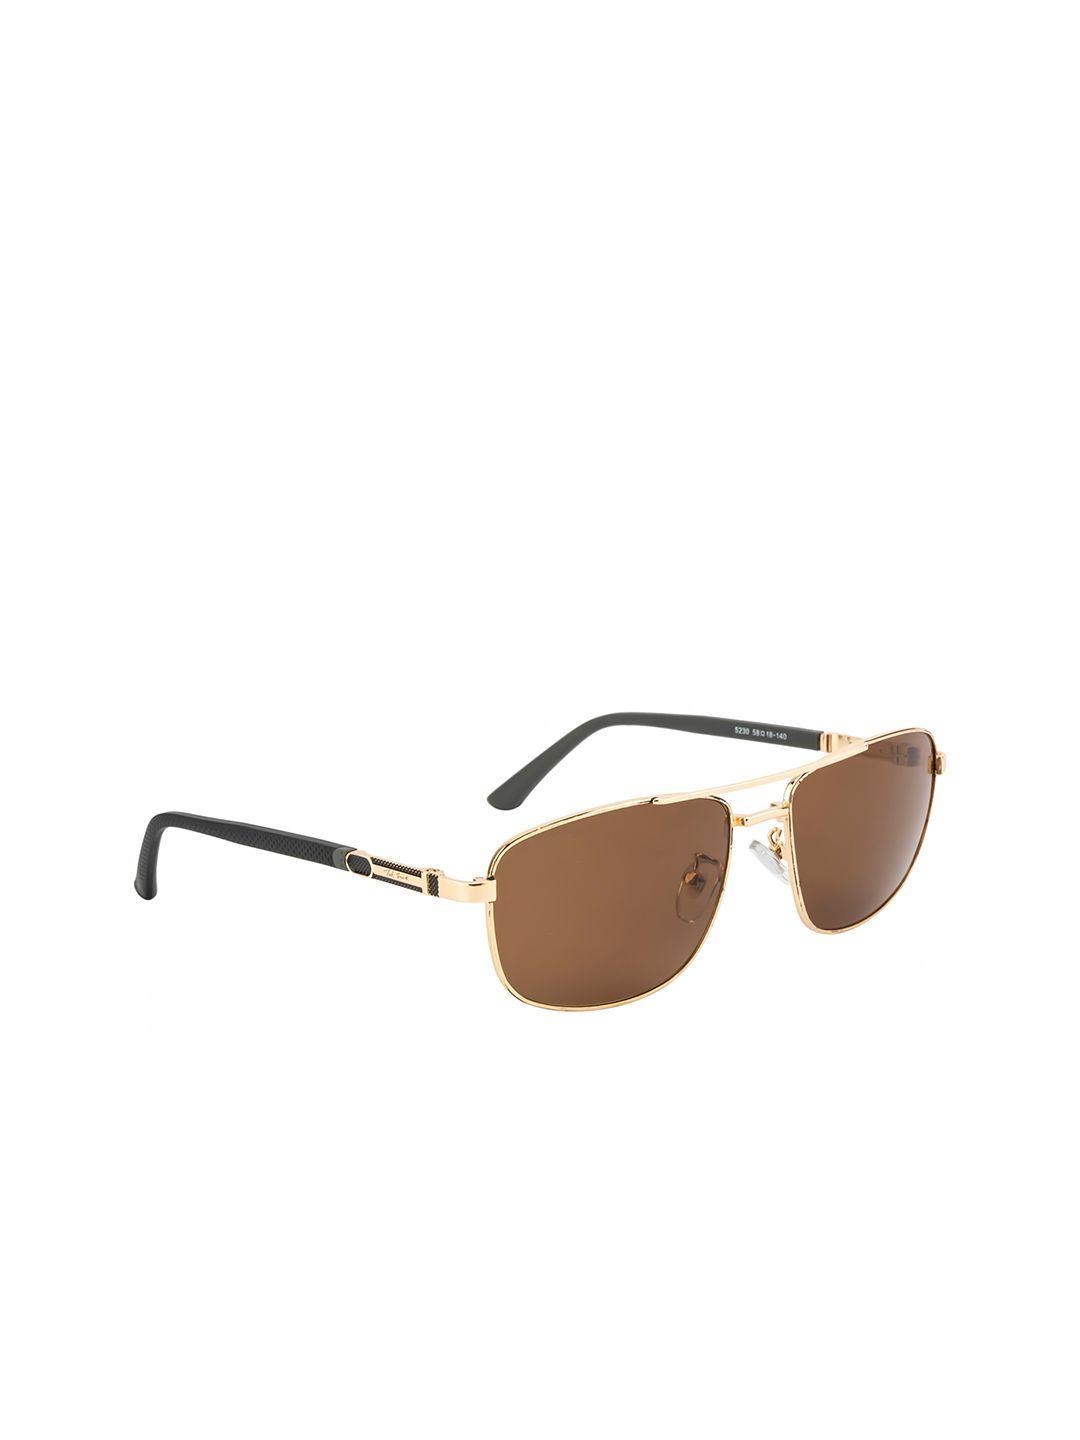 Ted Smith Unisex Brown Lens & Gold-Toned Aviator Sunglasses with UV Protected Lens